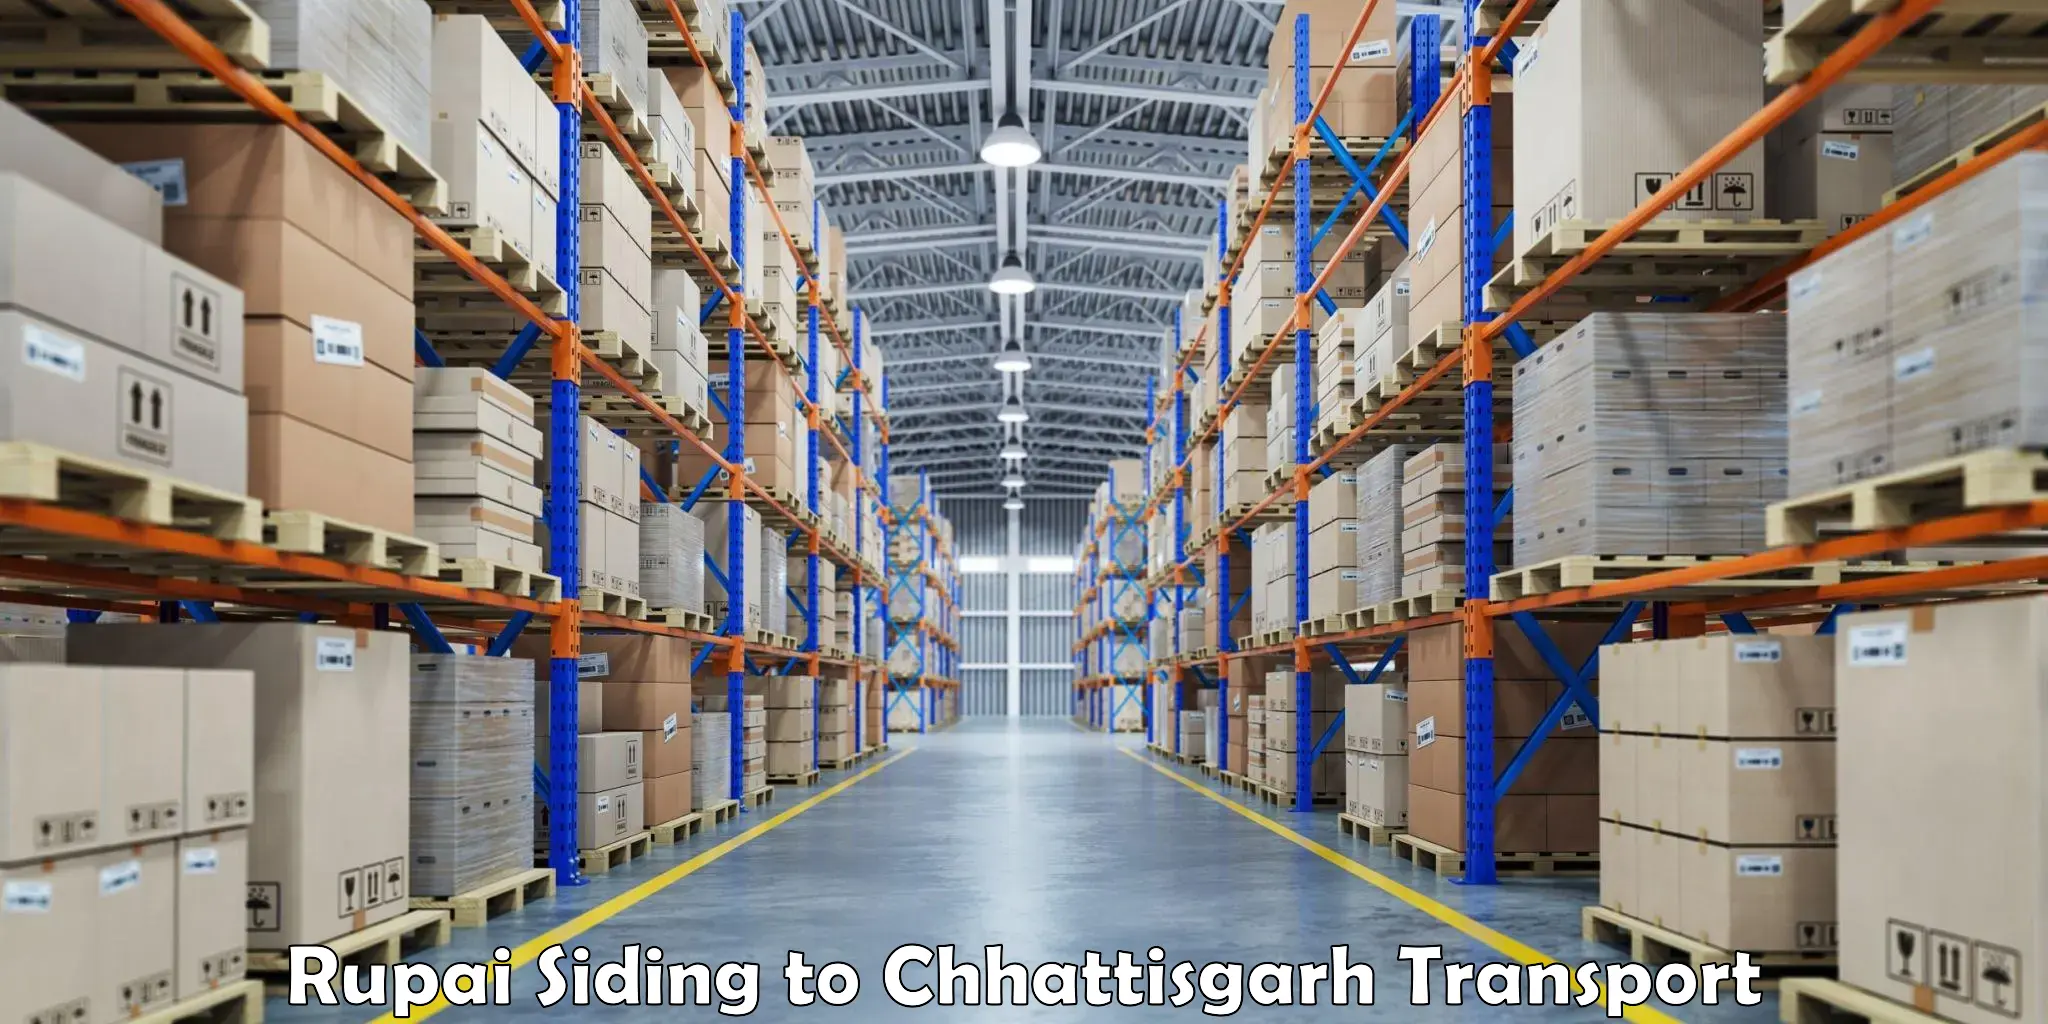 Part load transport service in India Rupai Siding to Raigarh